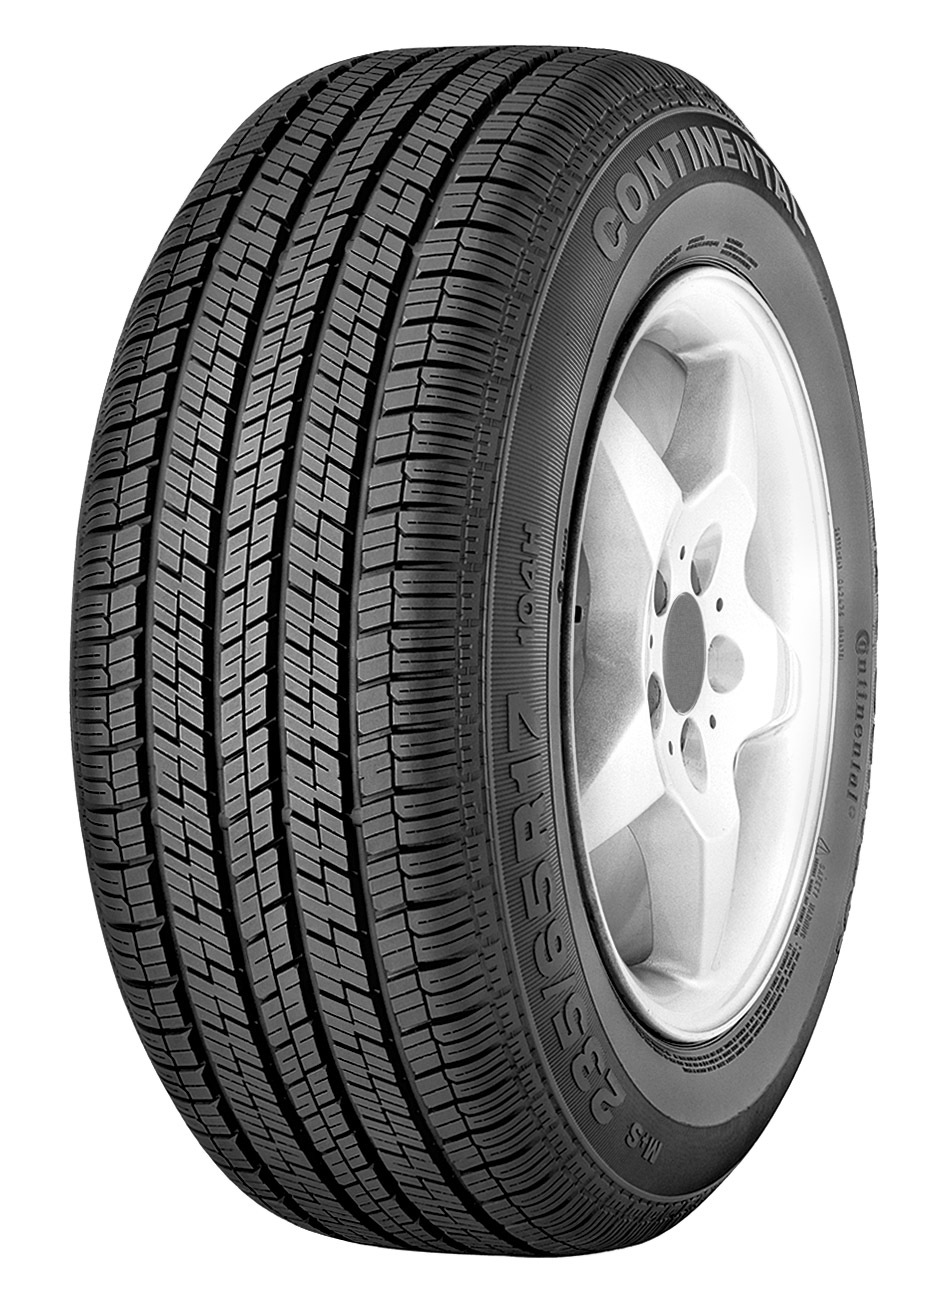 235/70 R 17 111H 4X4CONTACT m+s TL